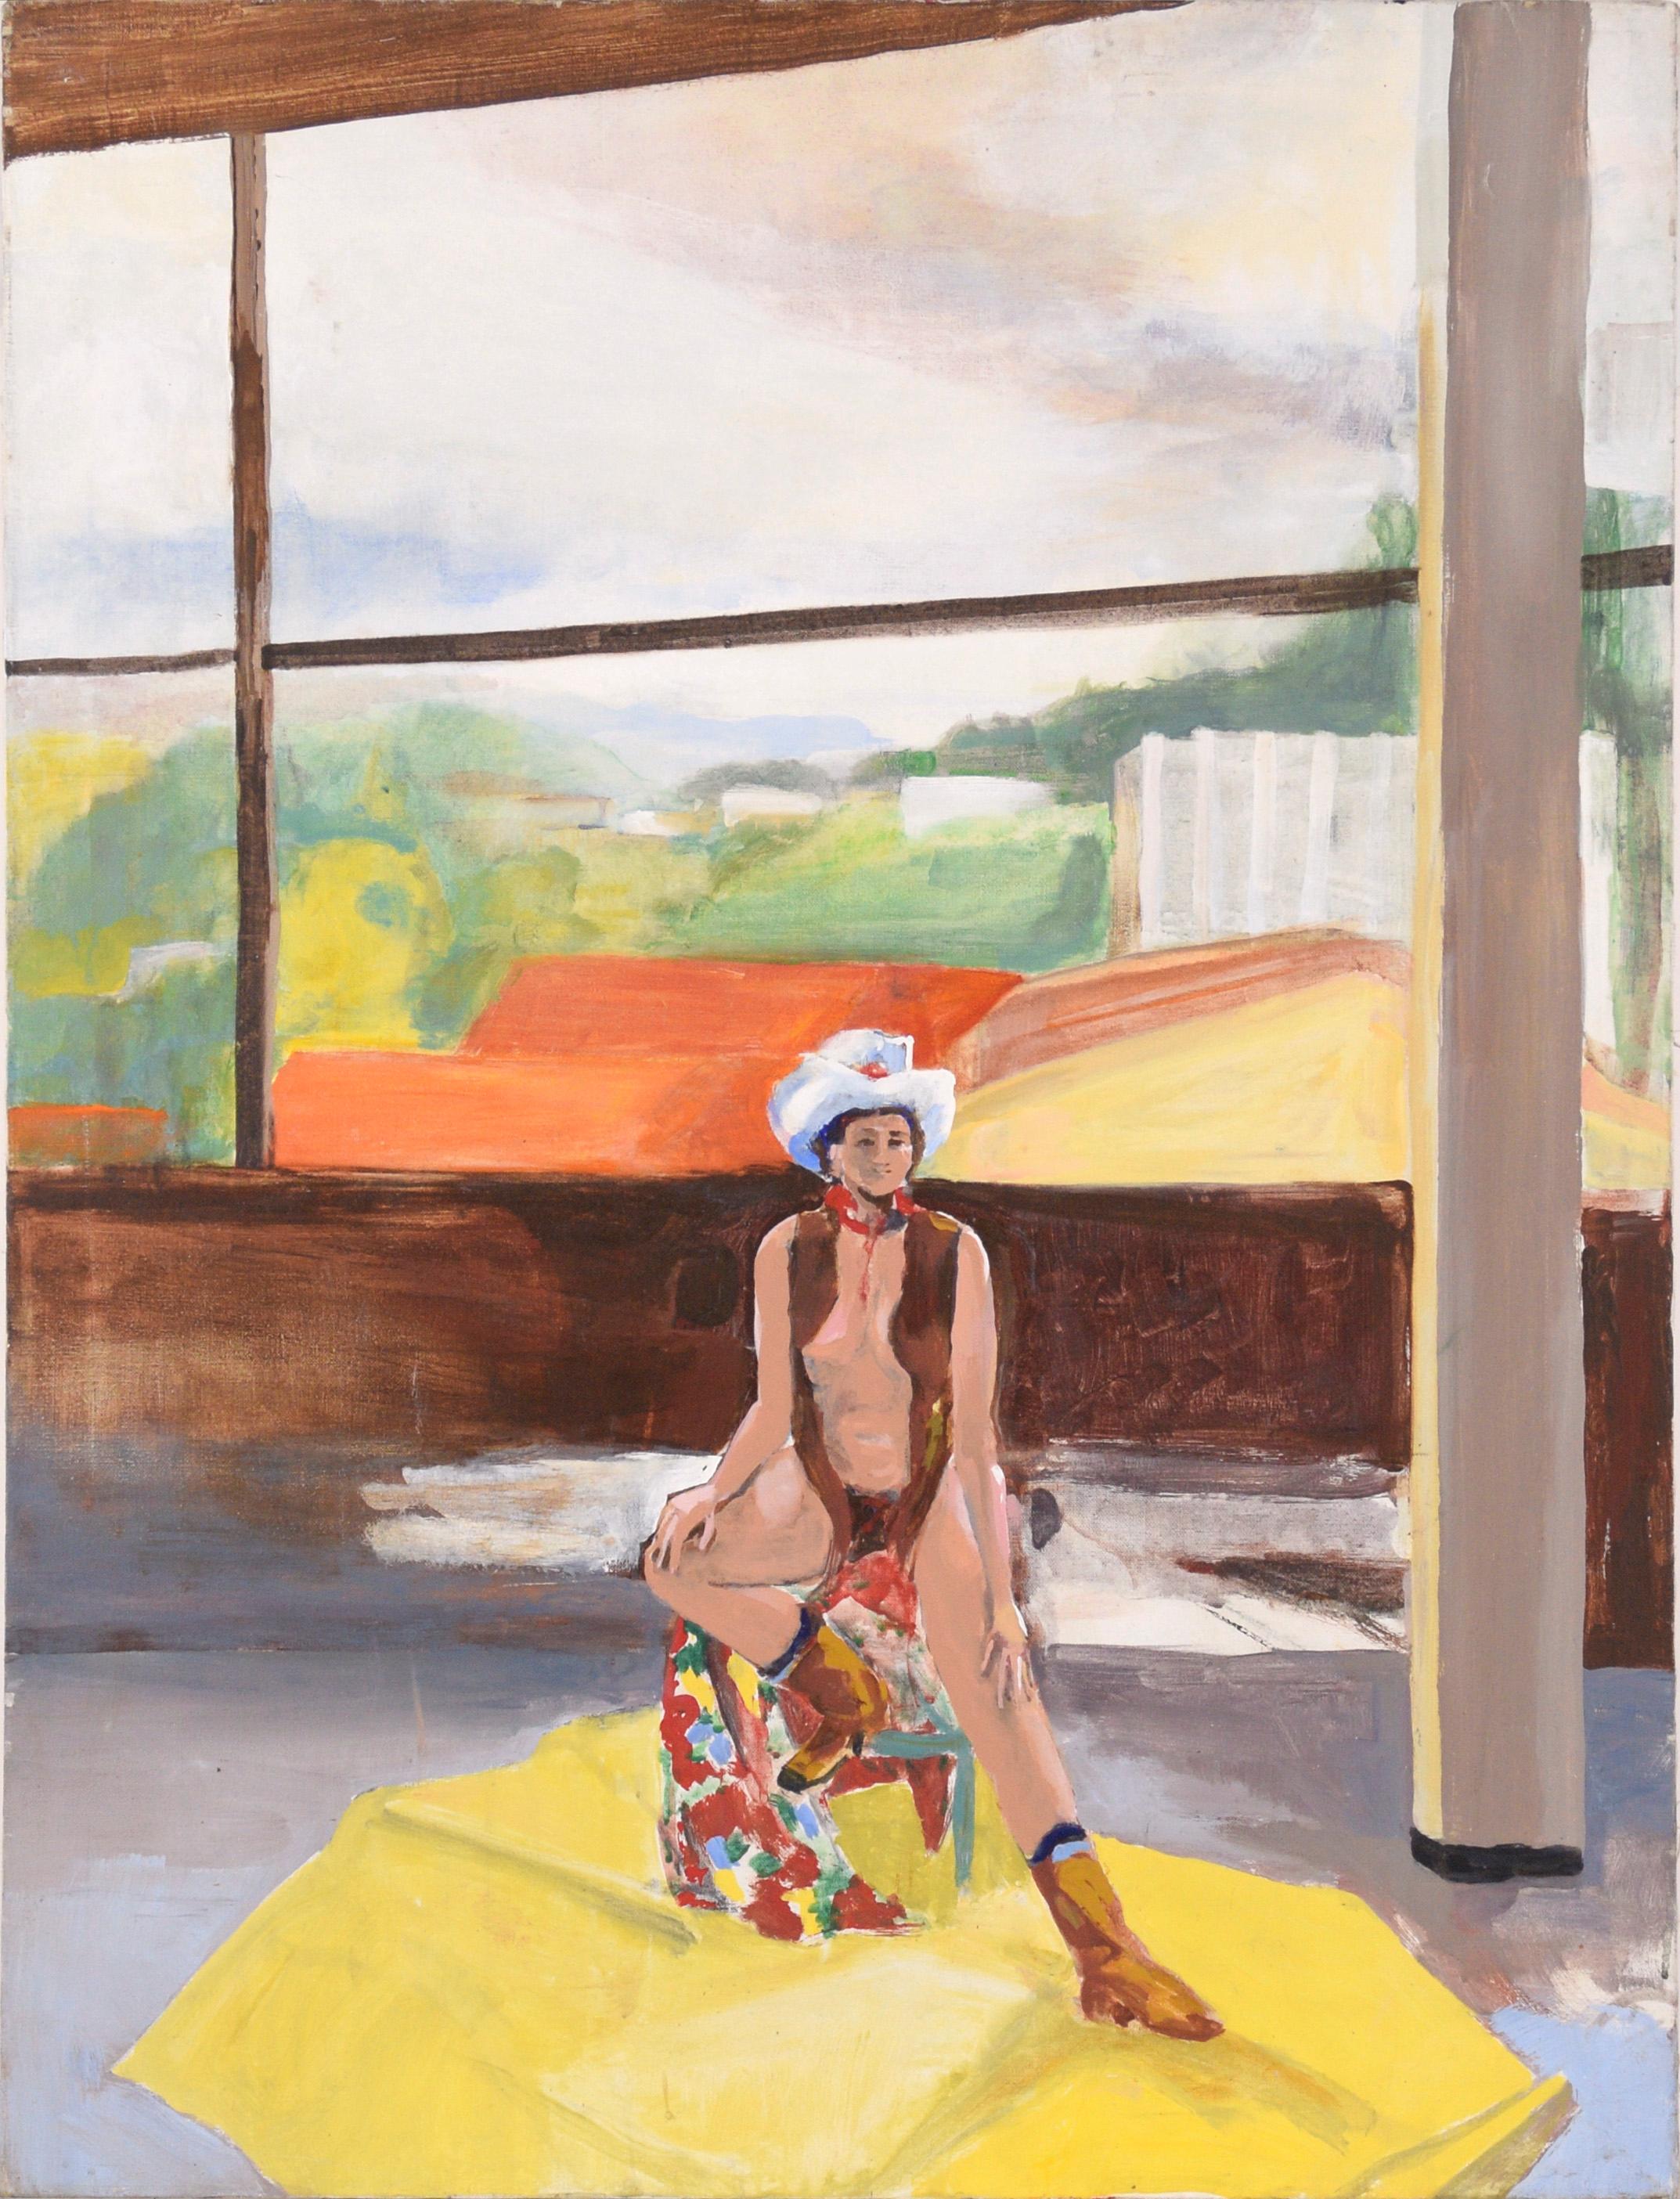 Patricia Gren Hayes Figurative Painting - Cowgirl in the Studio - Figurative Study in Oil on Canvas